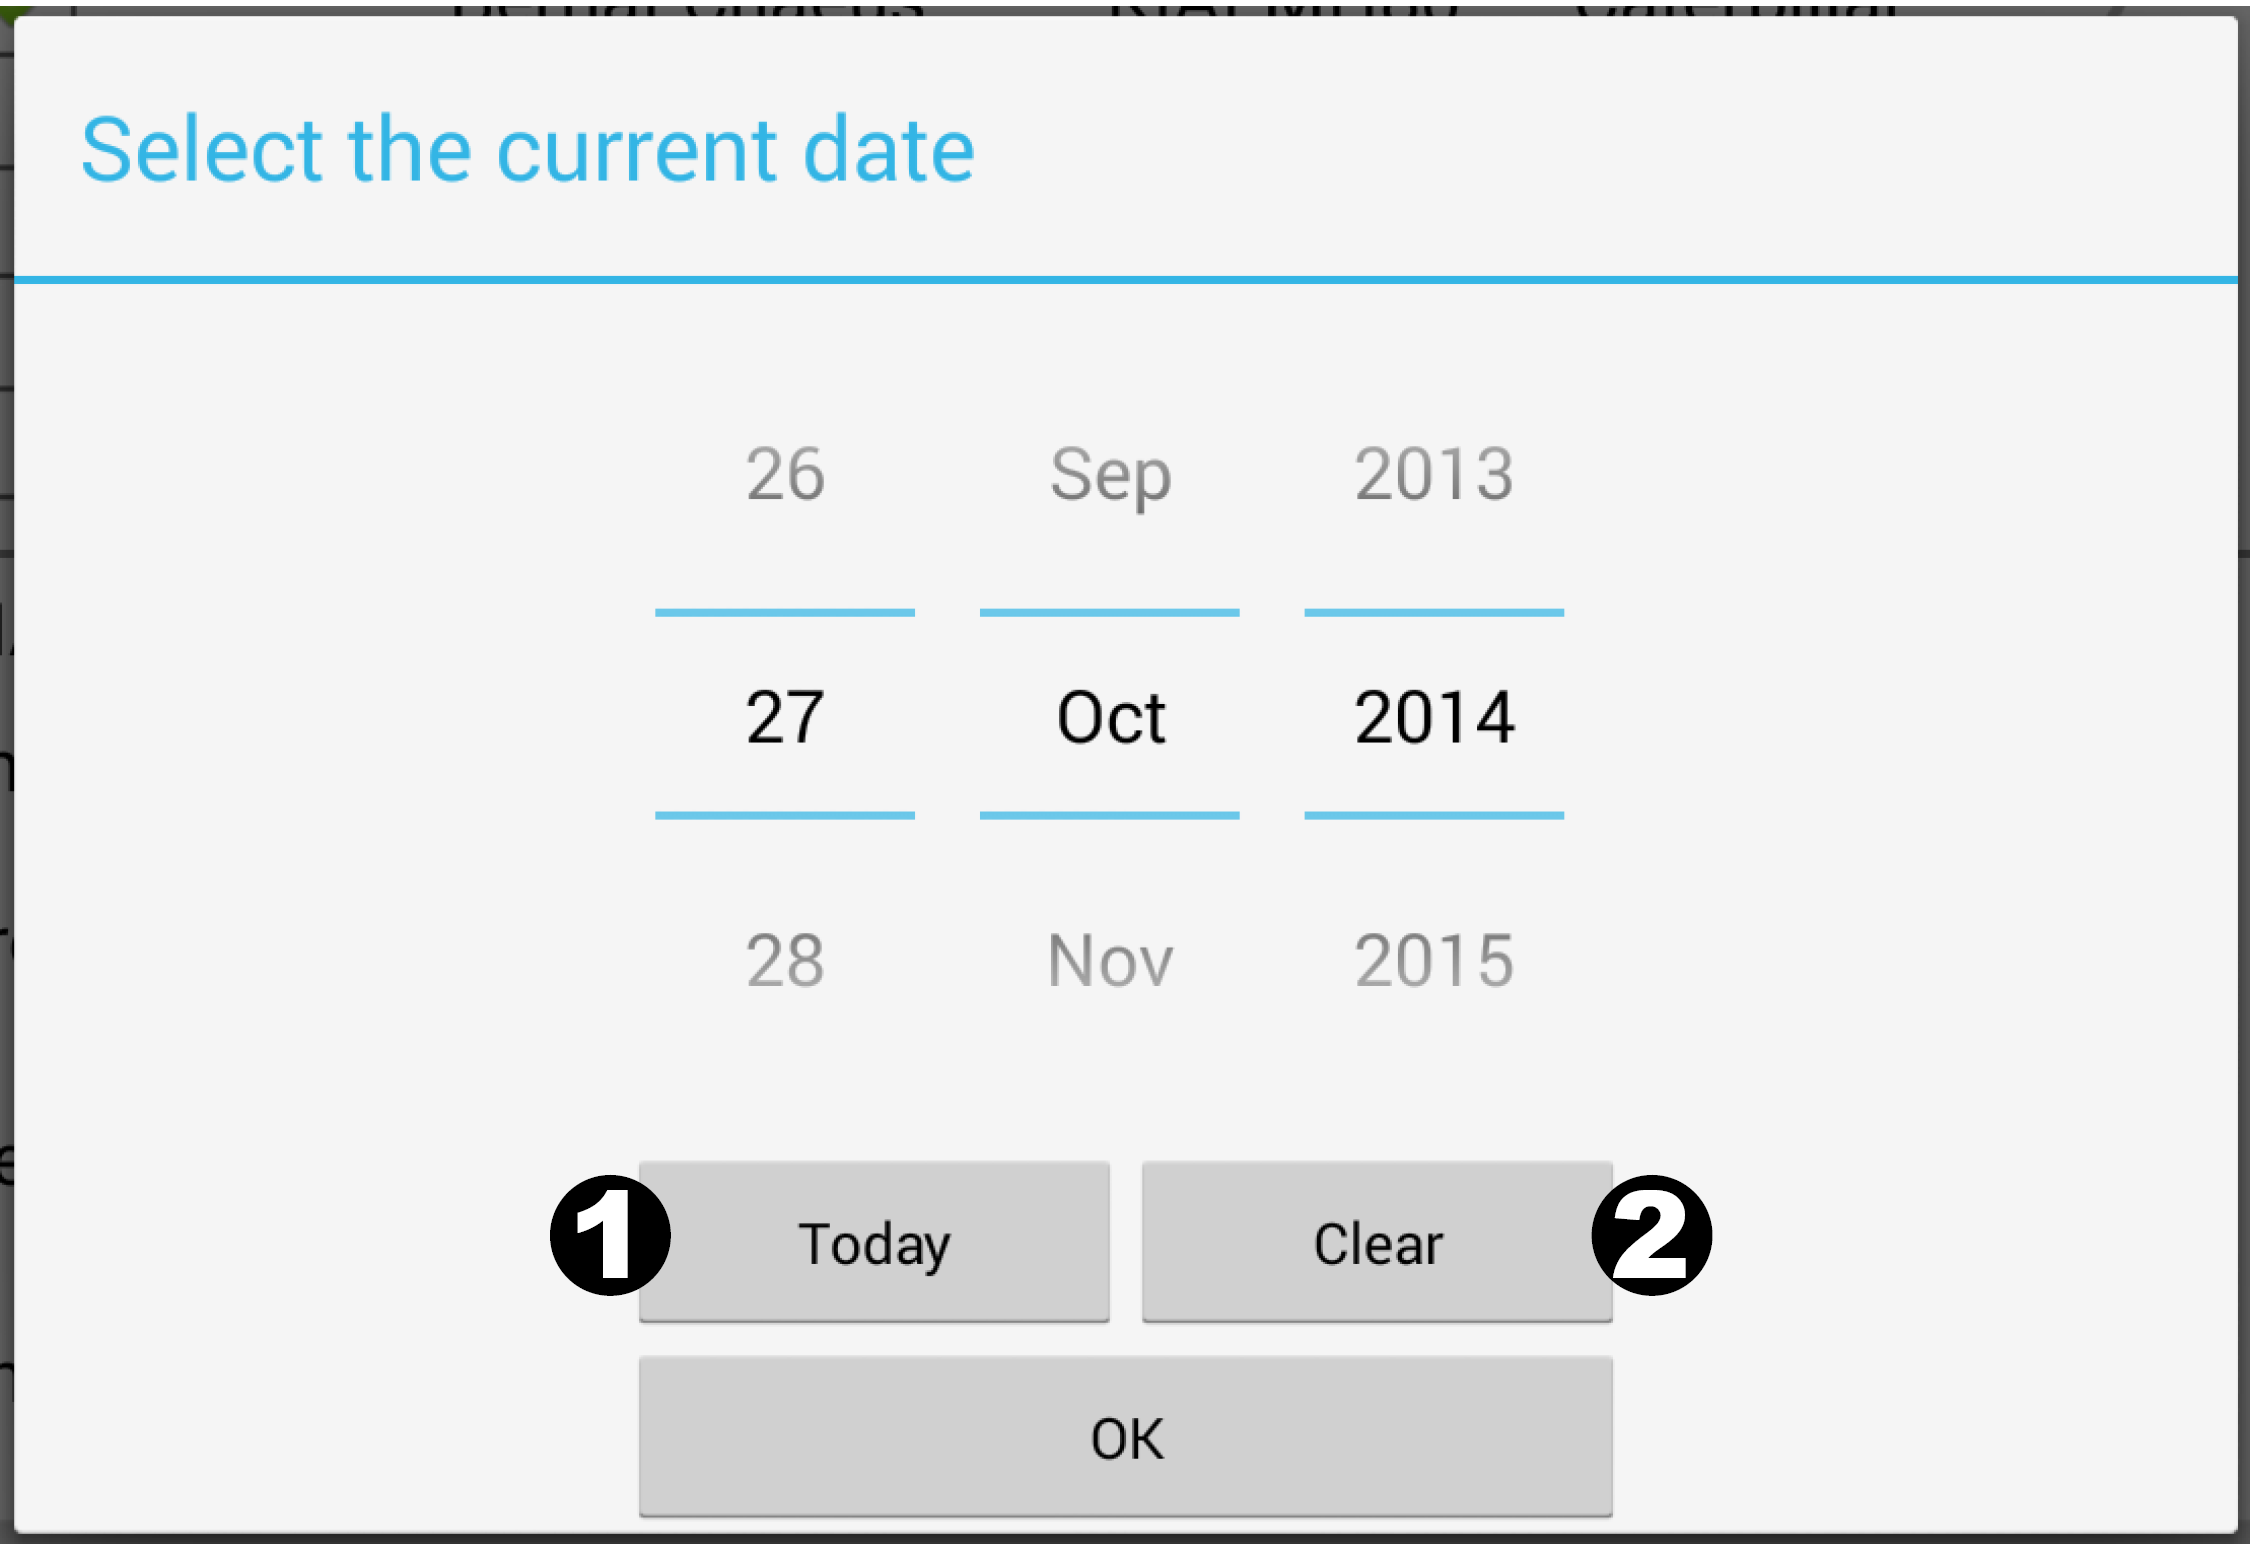 This is what the Select the current date datepicker looks like in the final form